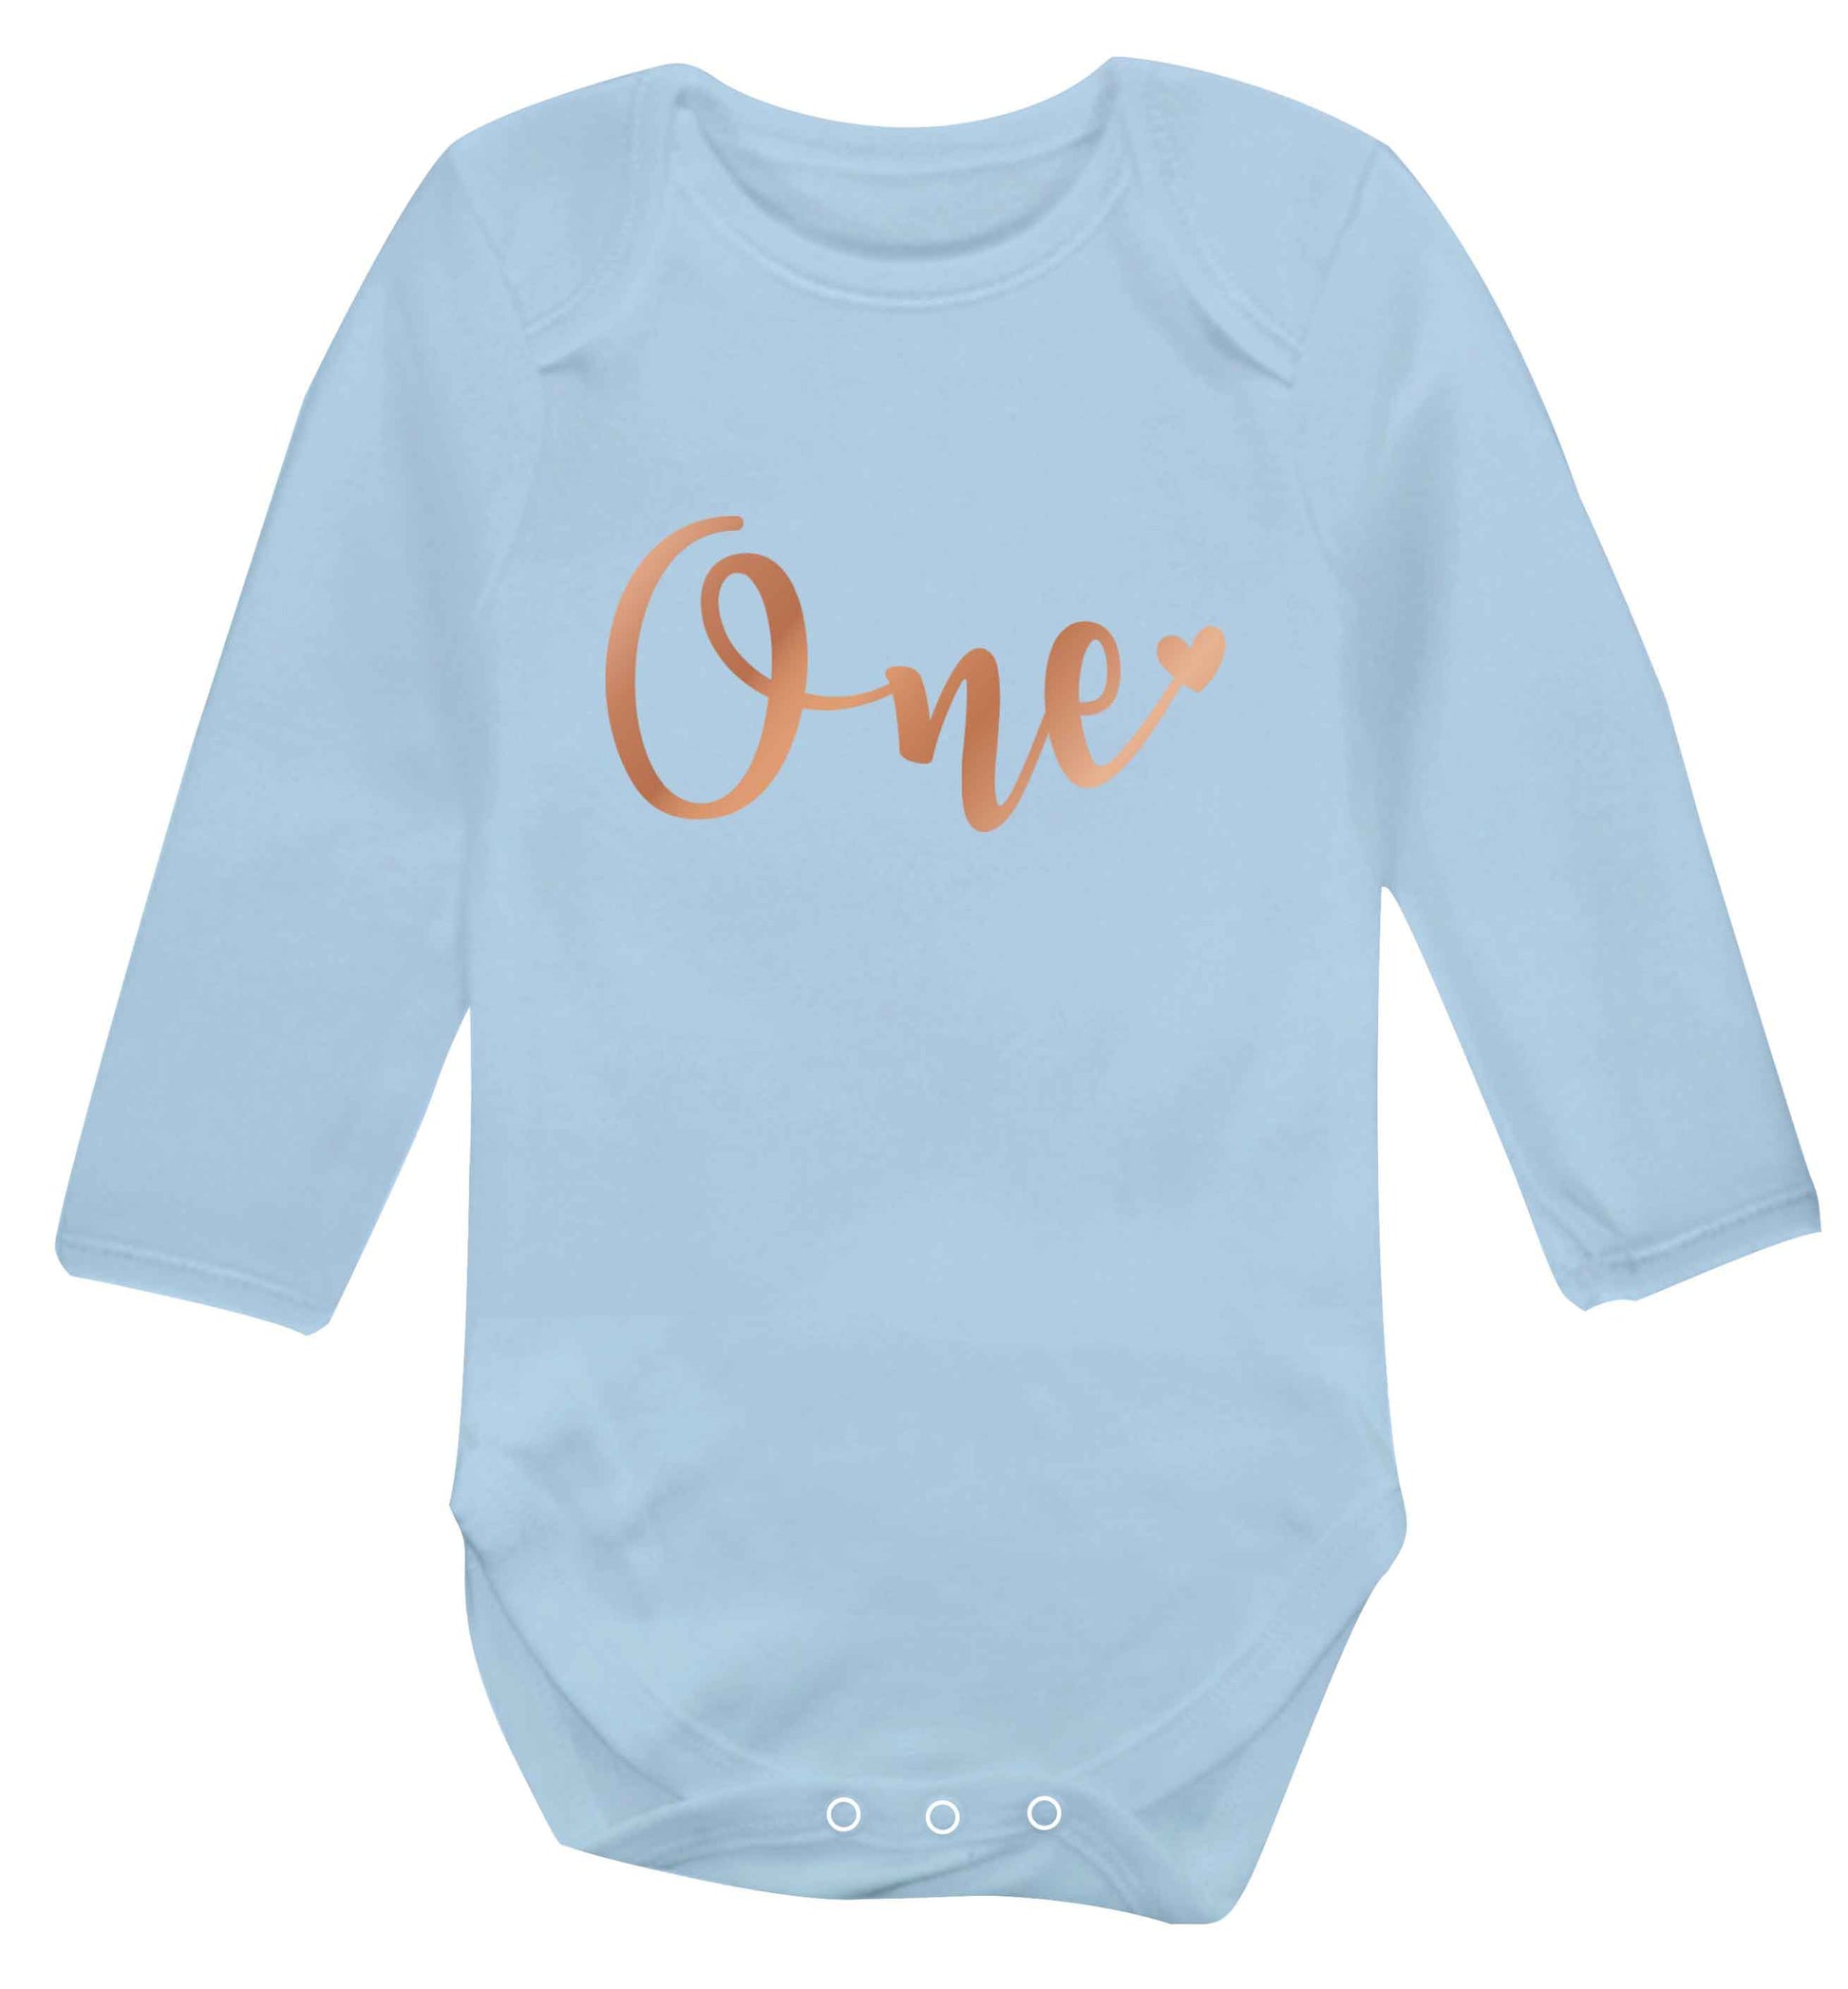 Rose Gold One baby vest long sleeved pale blue 6-12 months